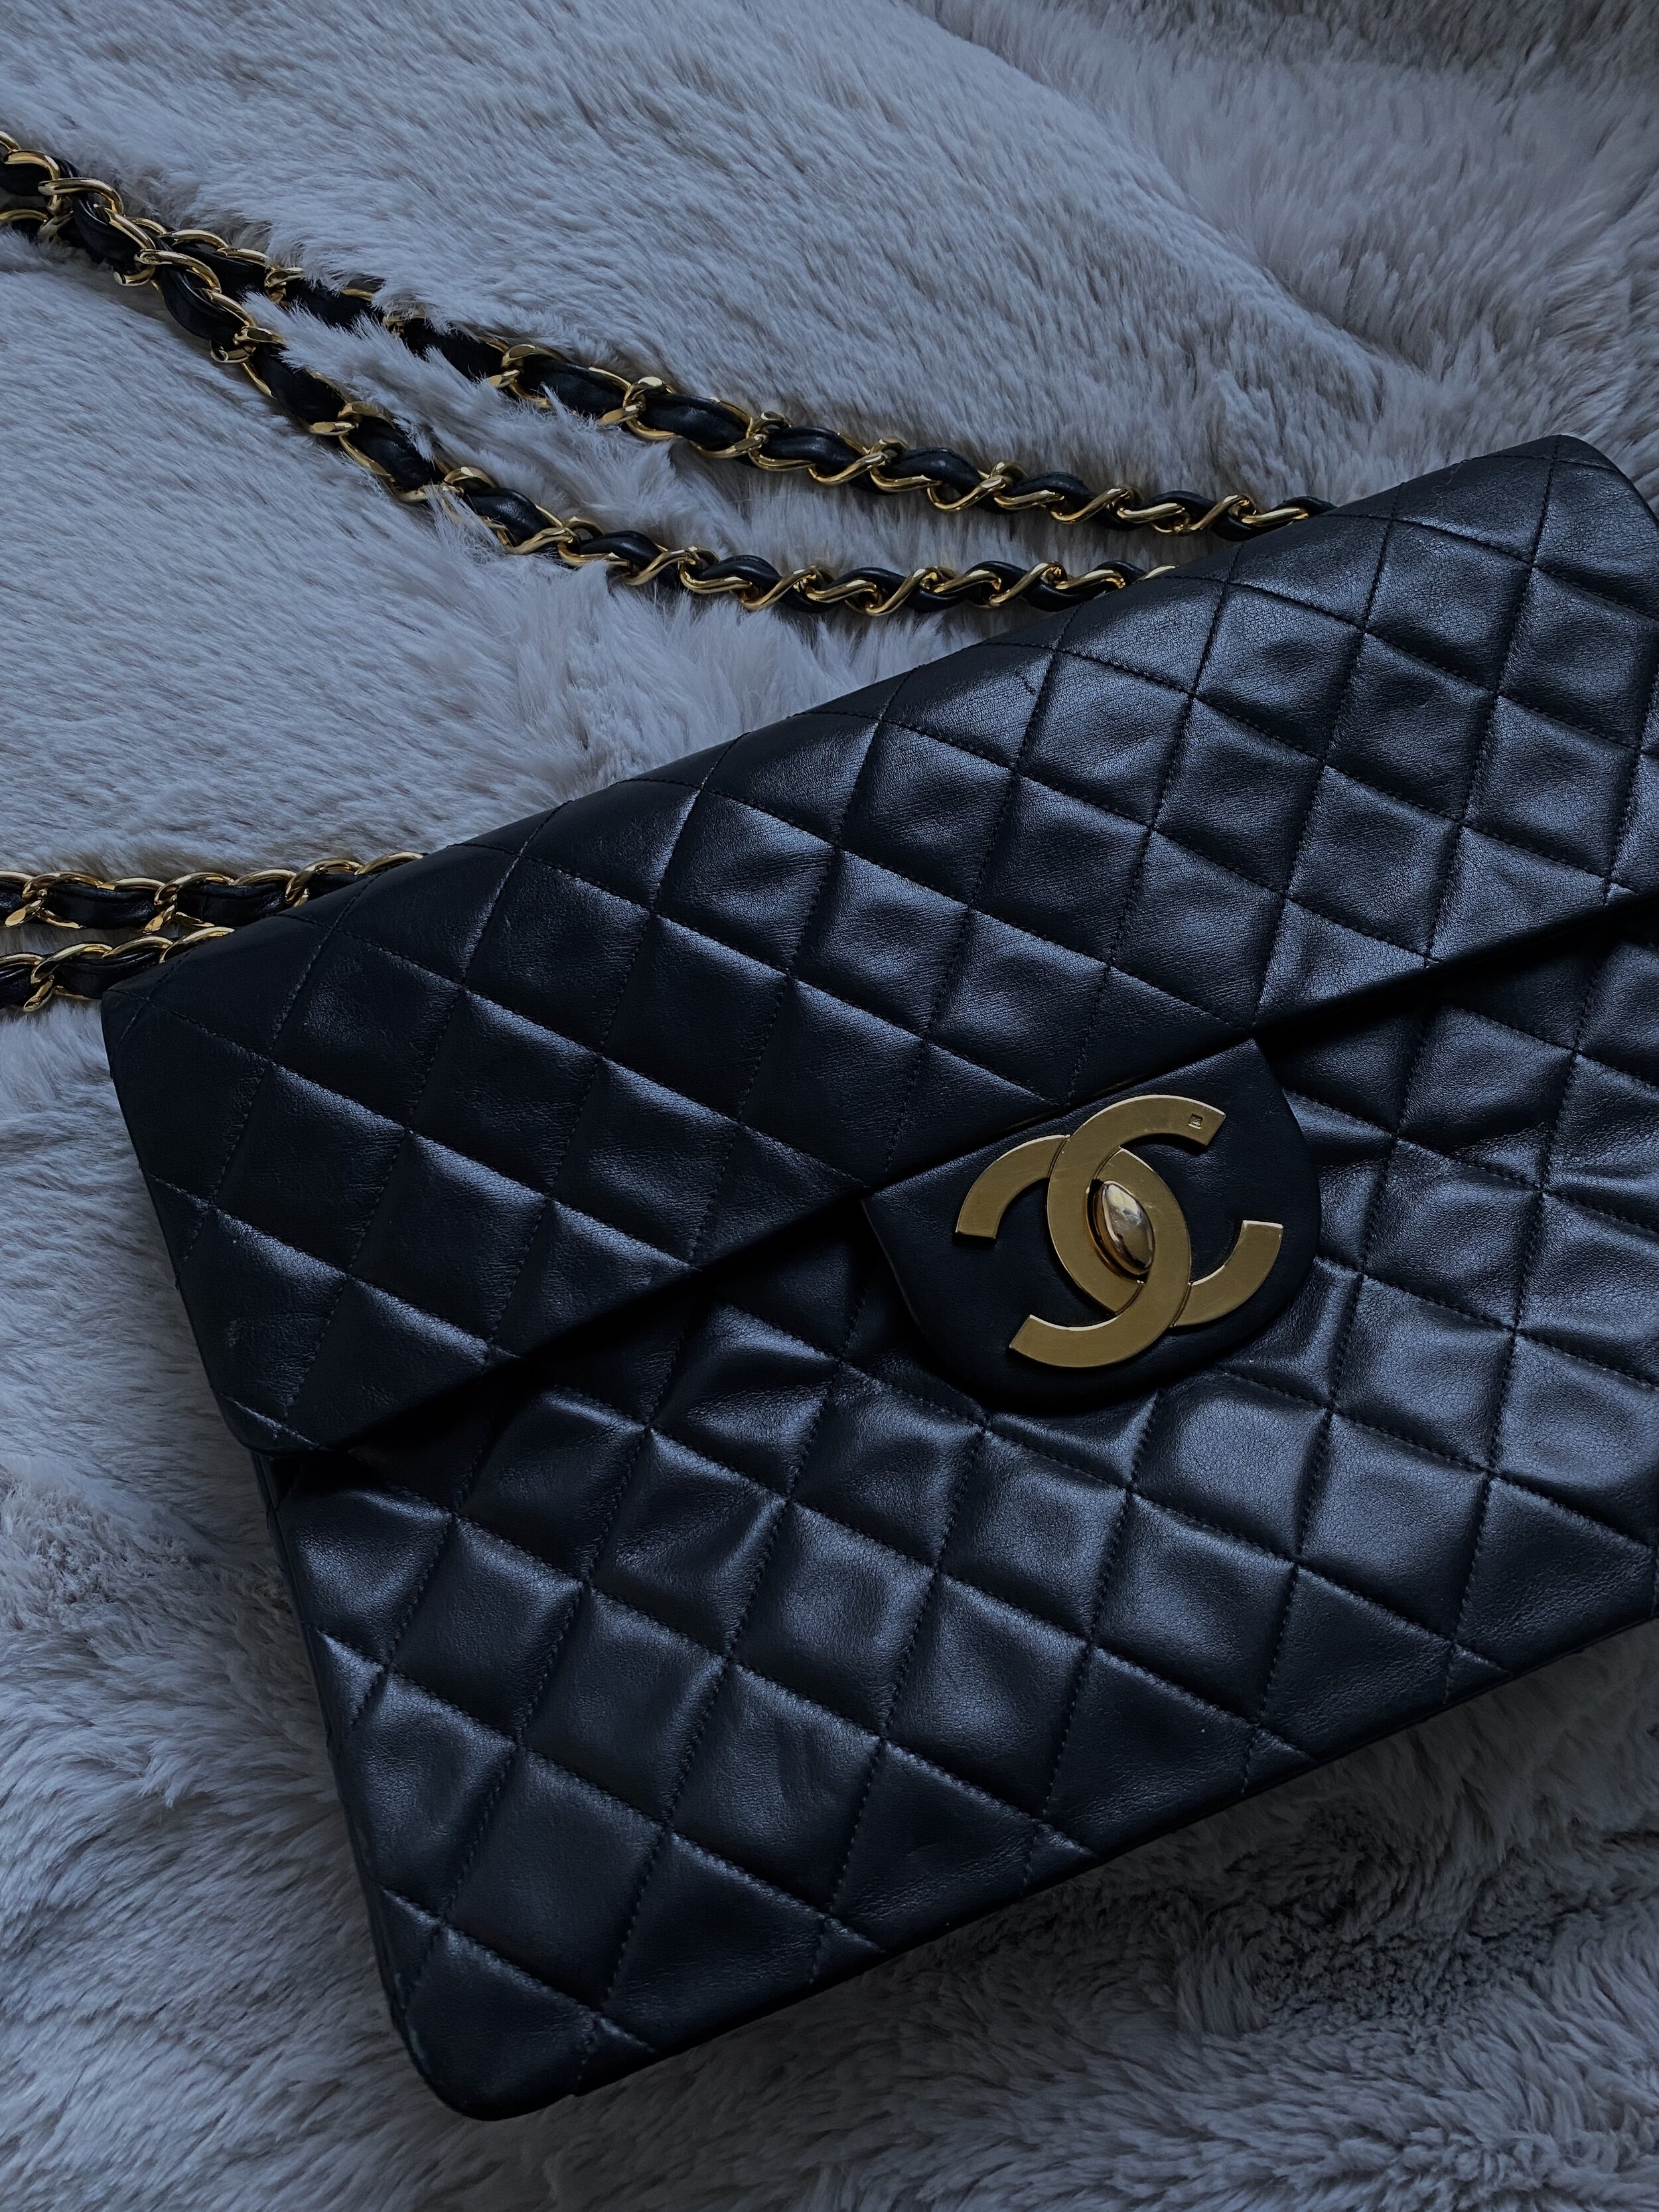 how to tell if a chanel bag is authentic